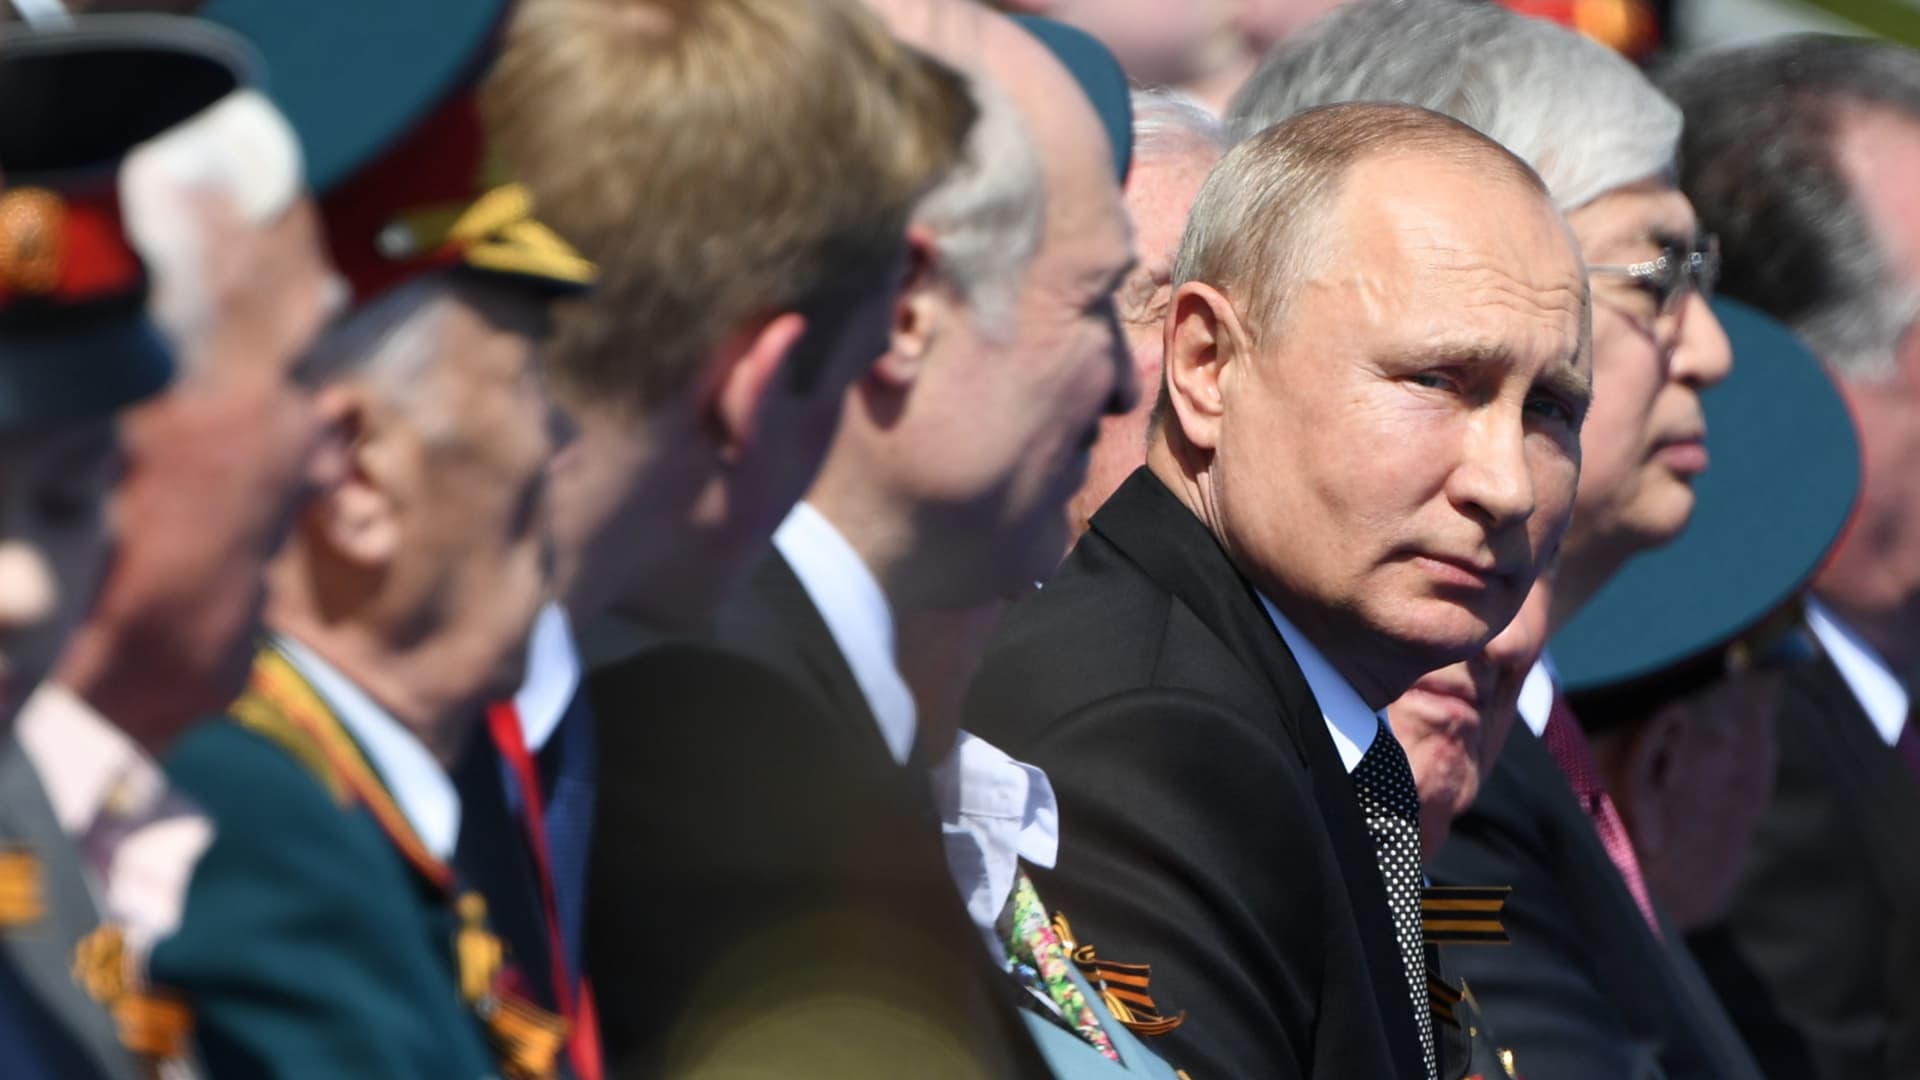 President of Russia Vladimir Putin looks on prior to the Victory Day military parade in Red Square marking the 75th anniversary of the victory in World War II, on June 24, 2020 in Moscow, Russia.